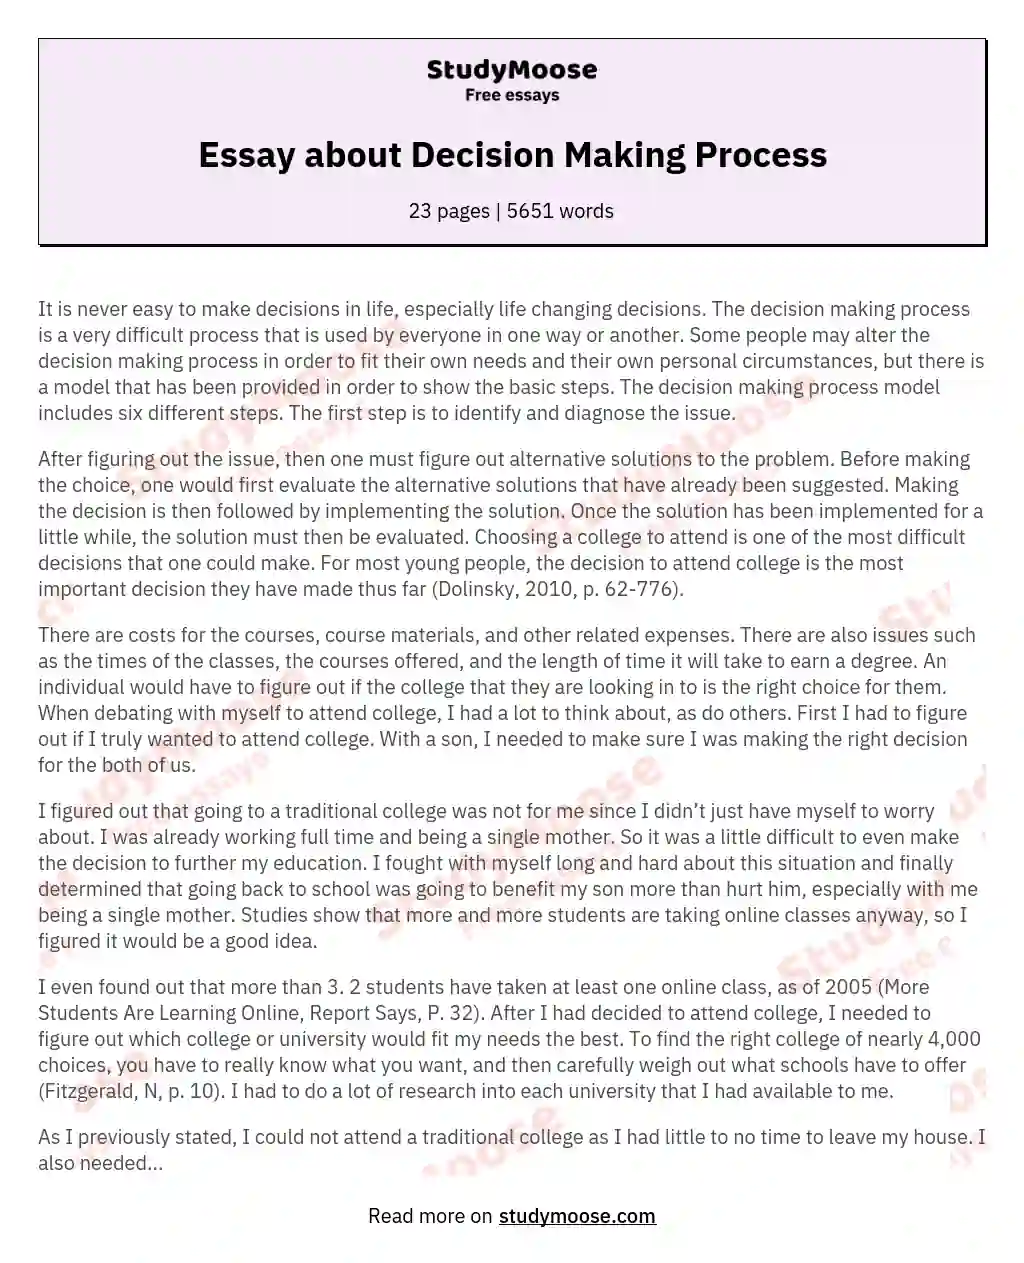 Essay about Decision Making Process